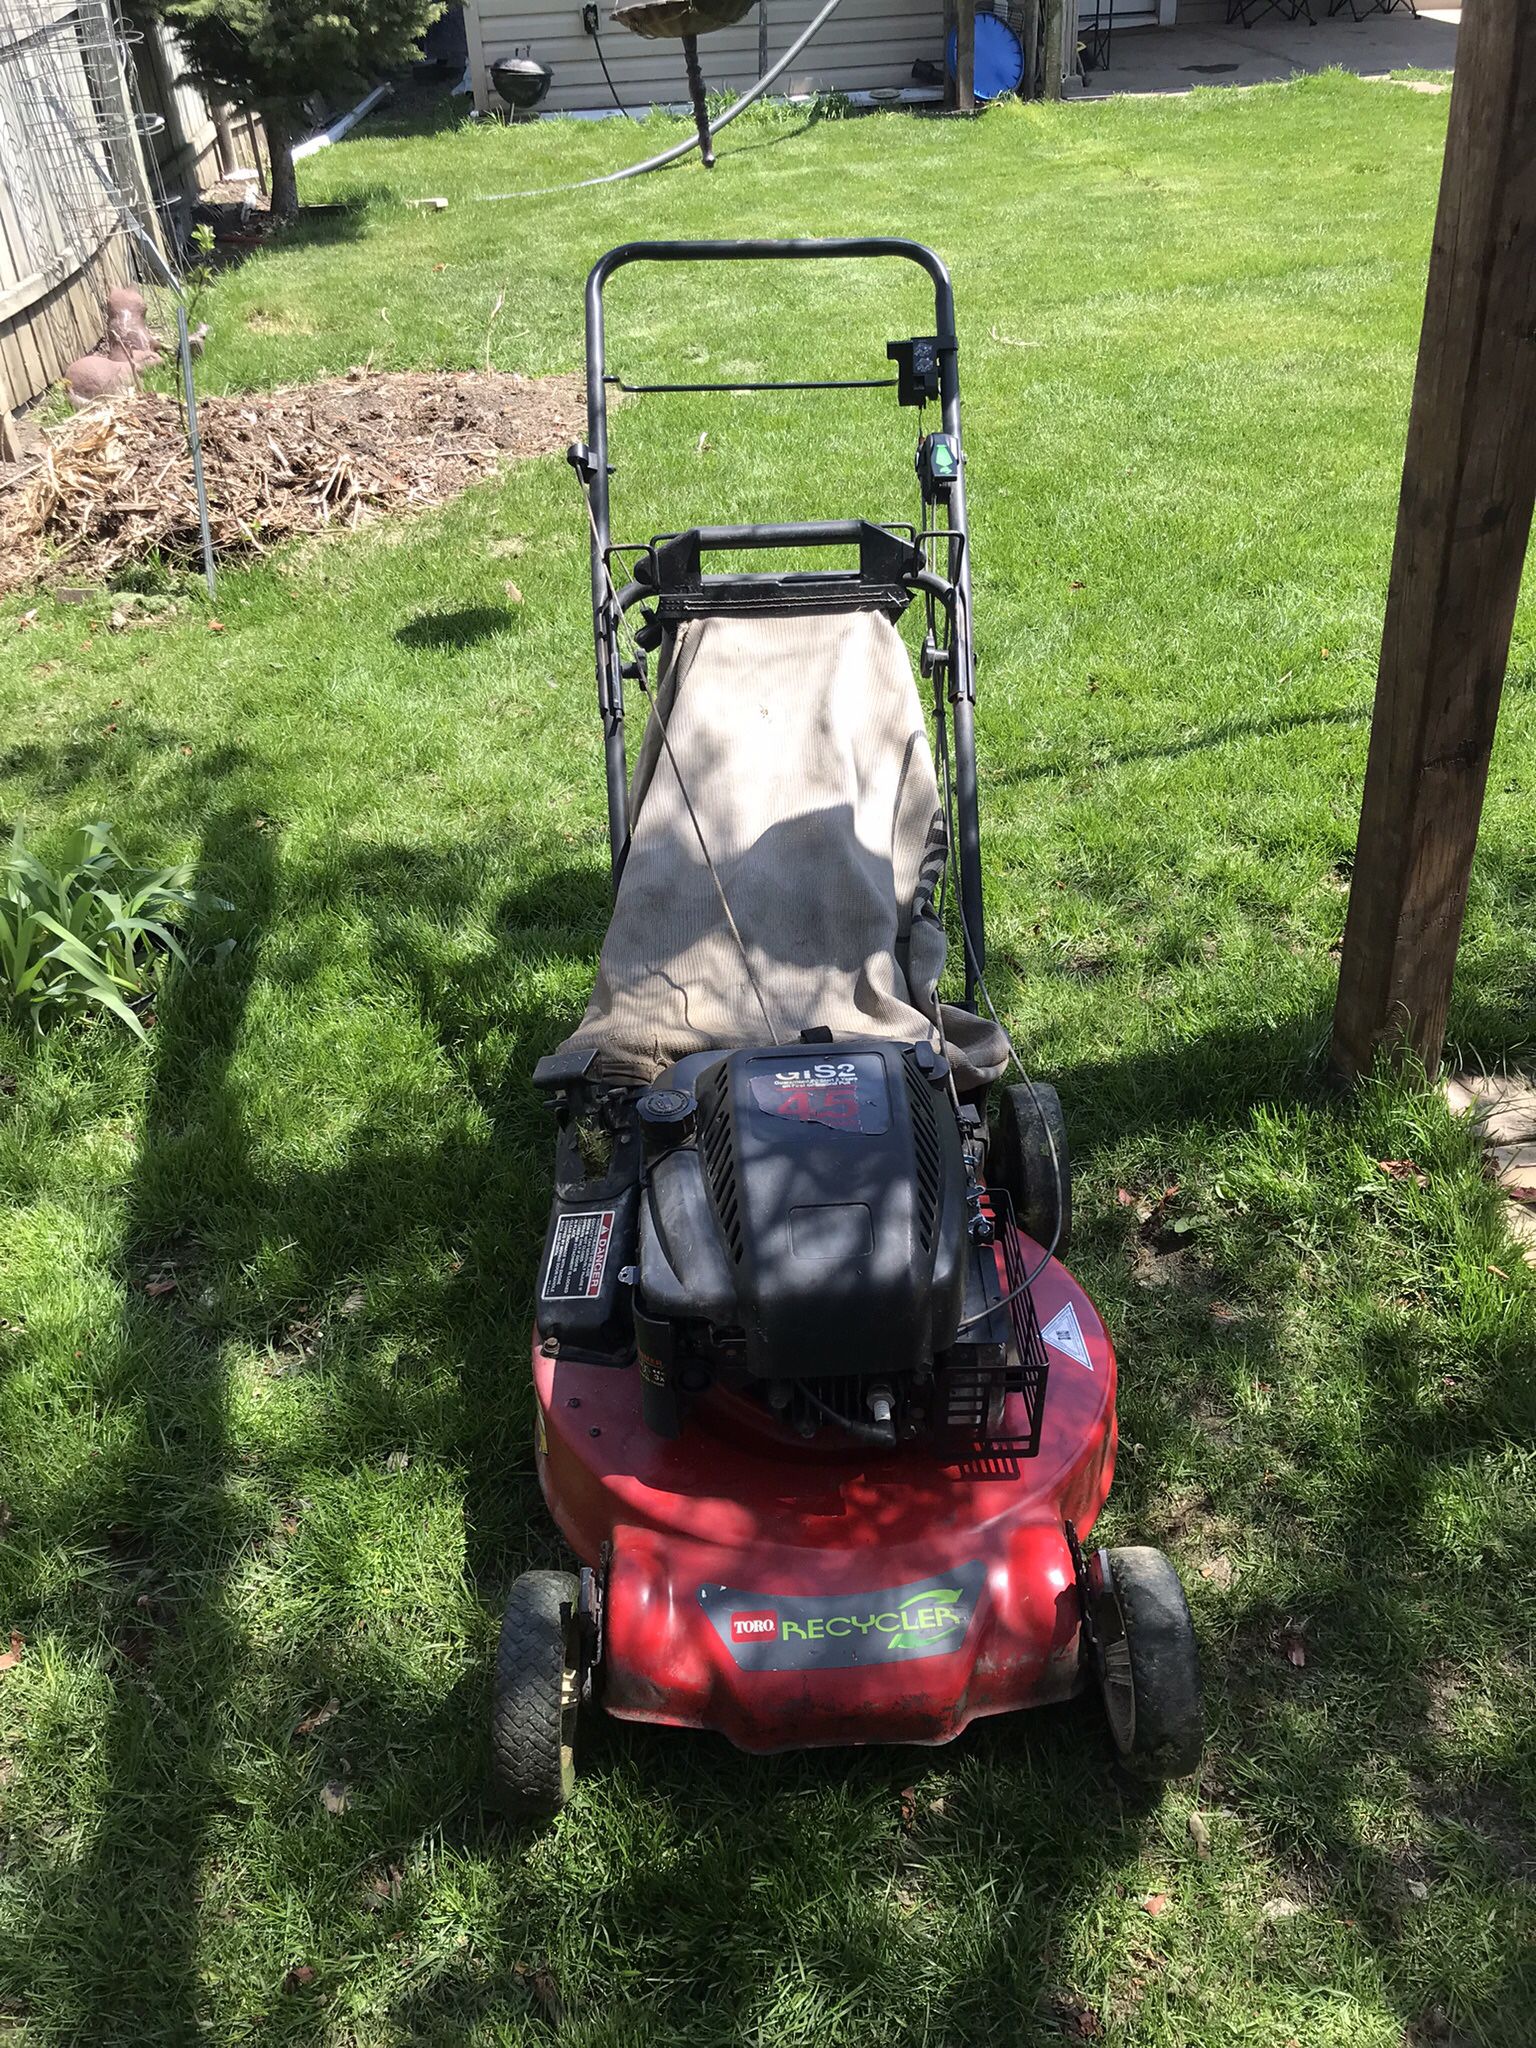 Lawn Mowers for sale in Victoria, British Columbia, Facebook Marketplace